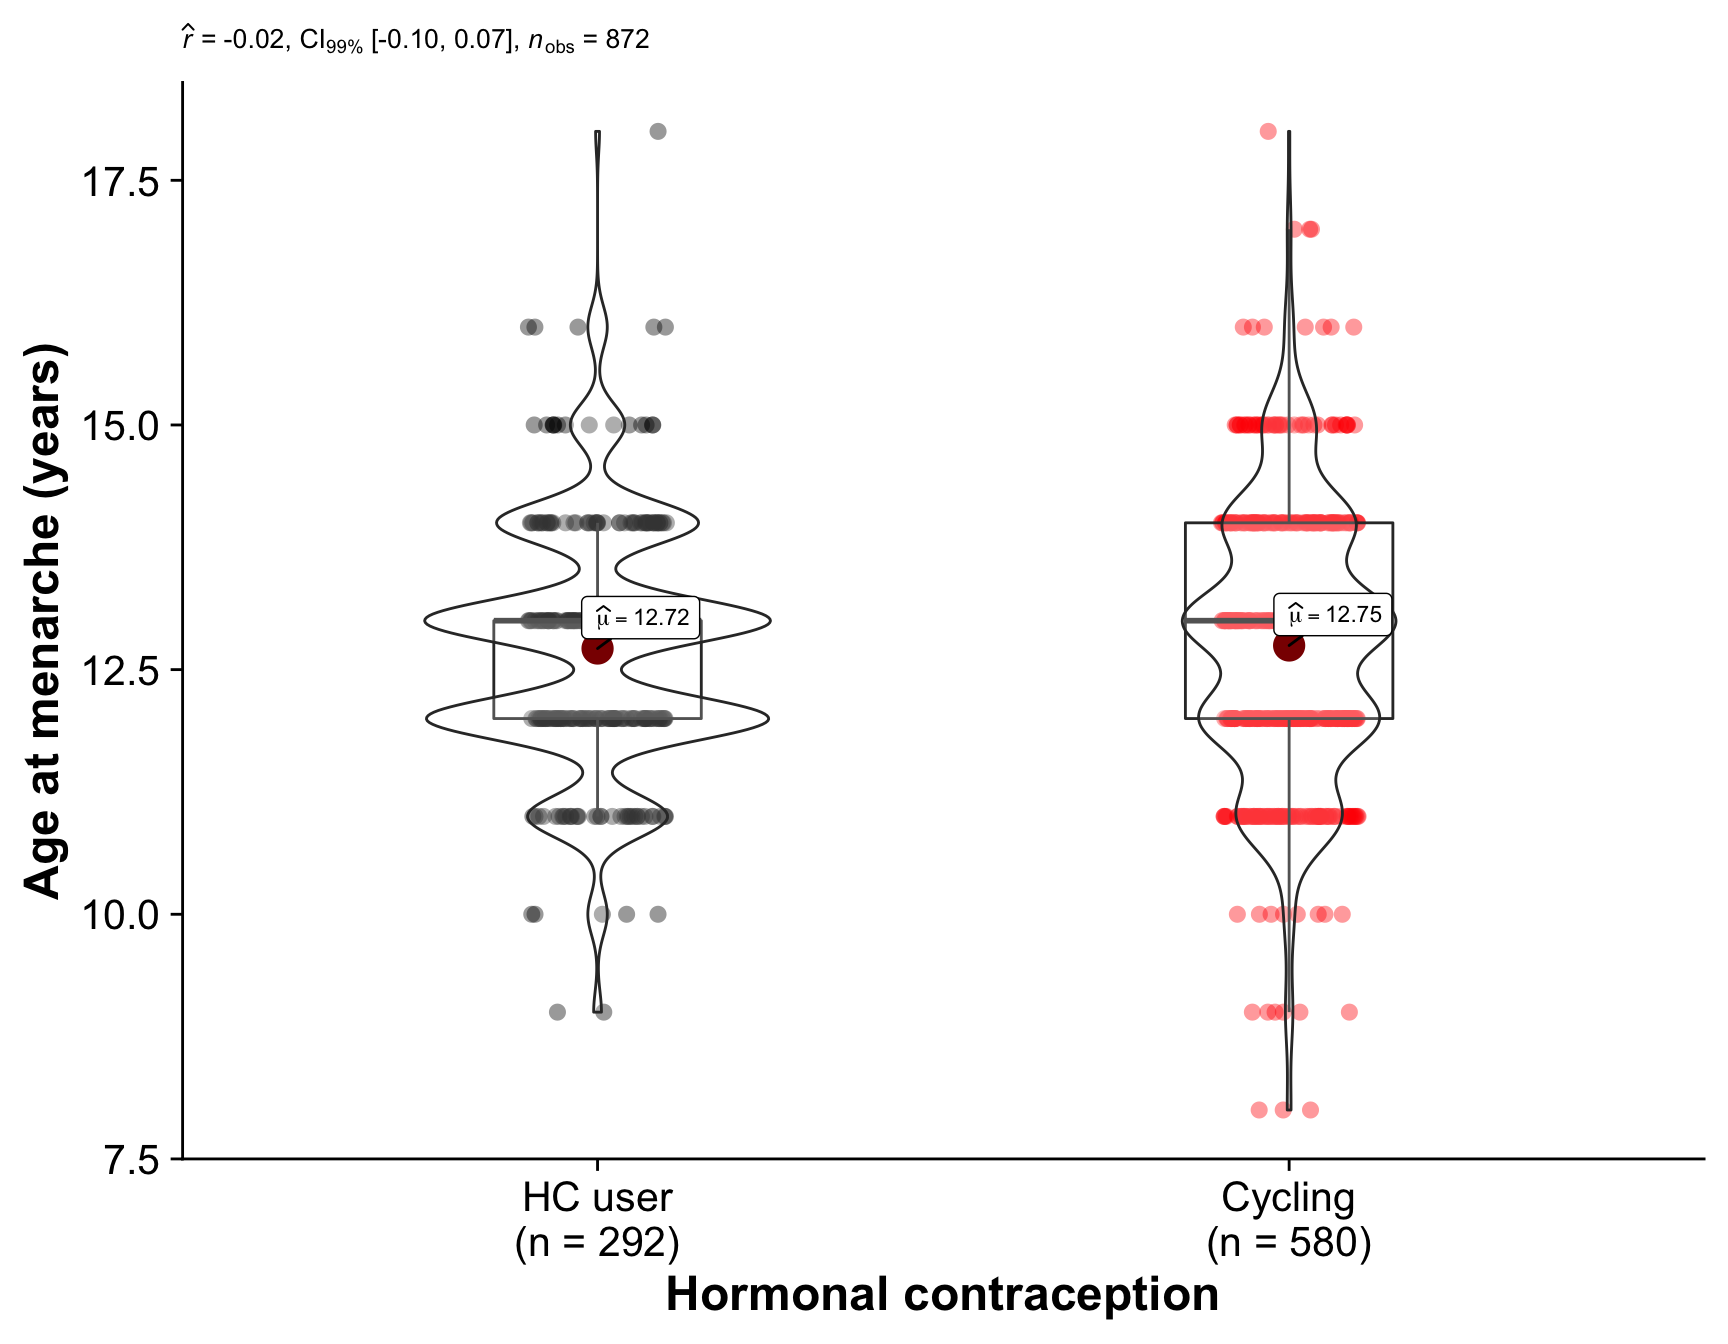 Comparison of the hormonal contraception users (our quasi-control group) with women who are regularly cycling. The plot shows the distribution of values in each group and the results of a Mann-Whitney U test.